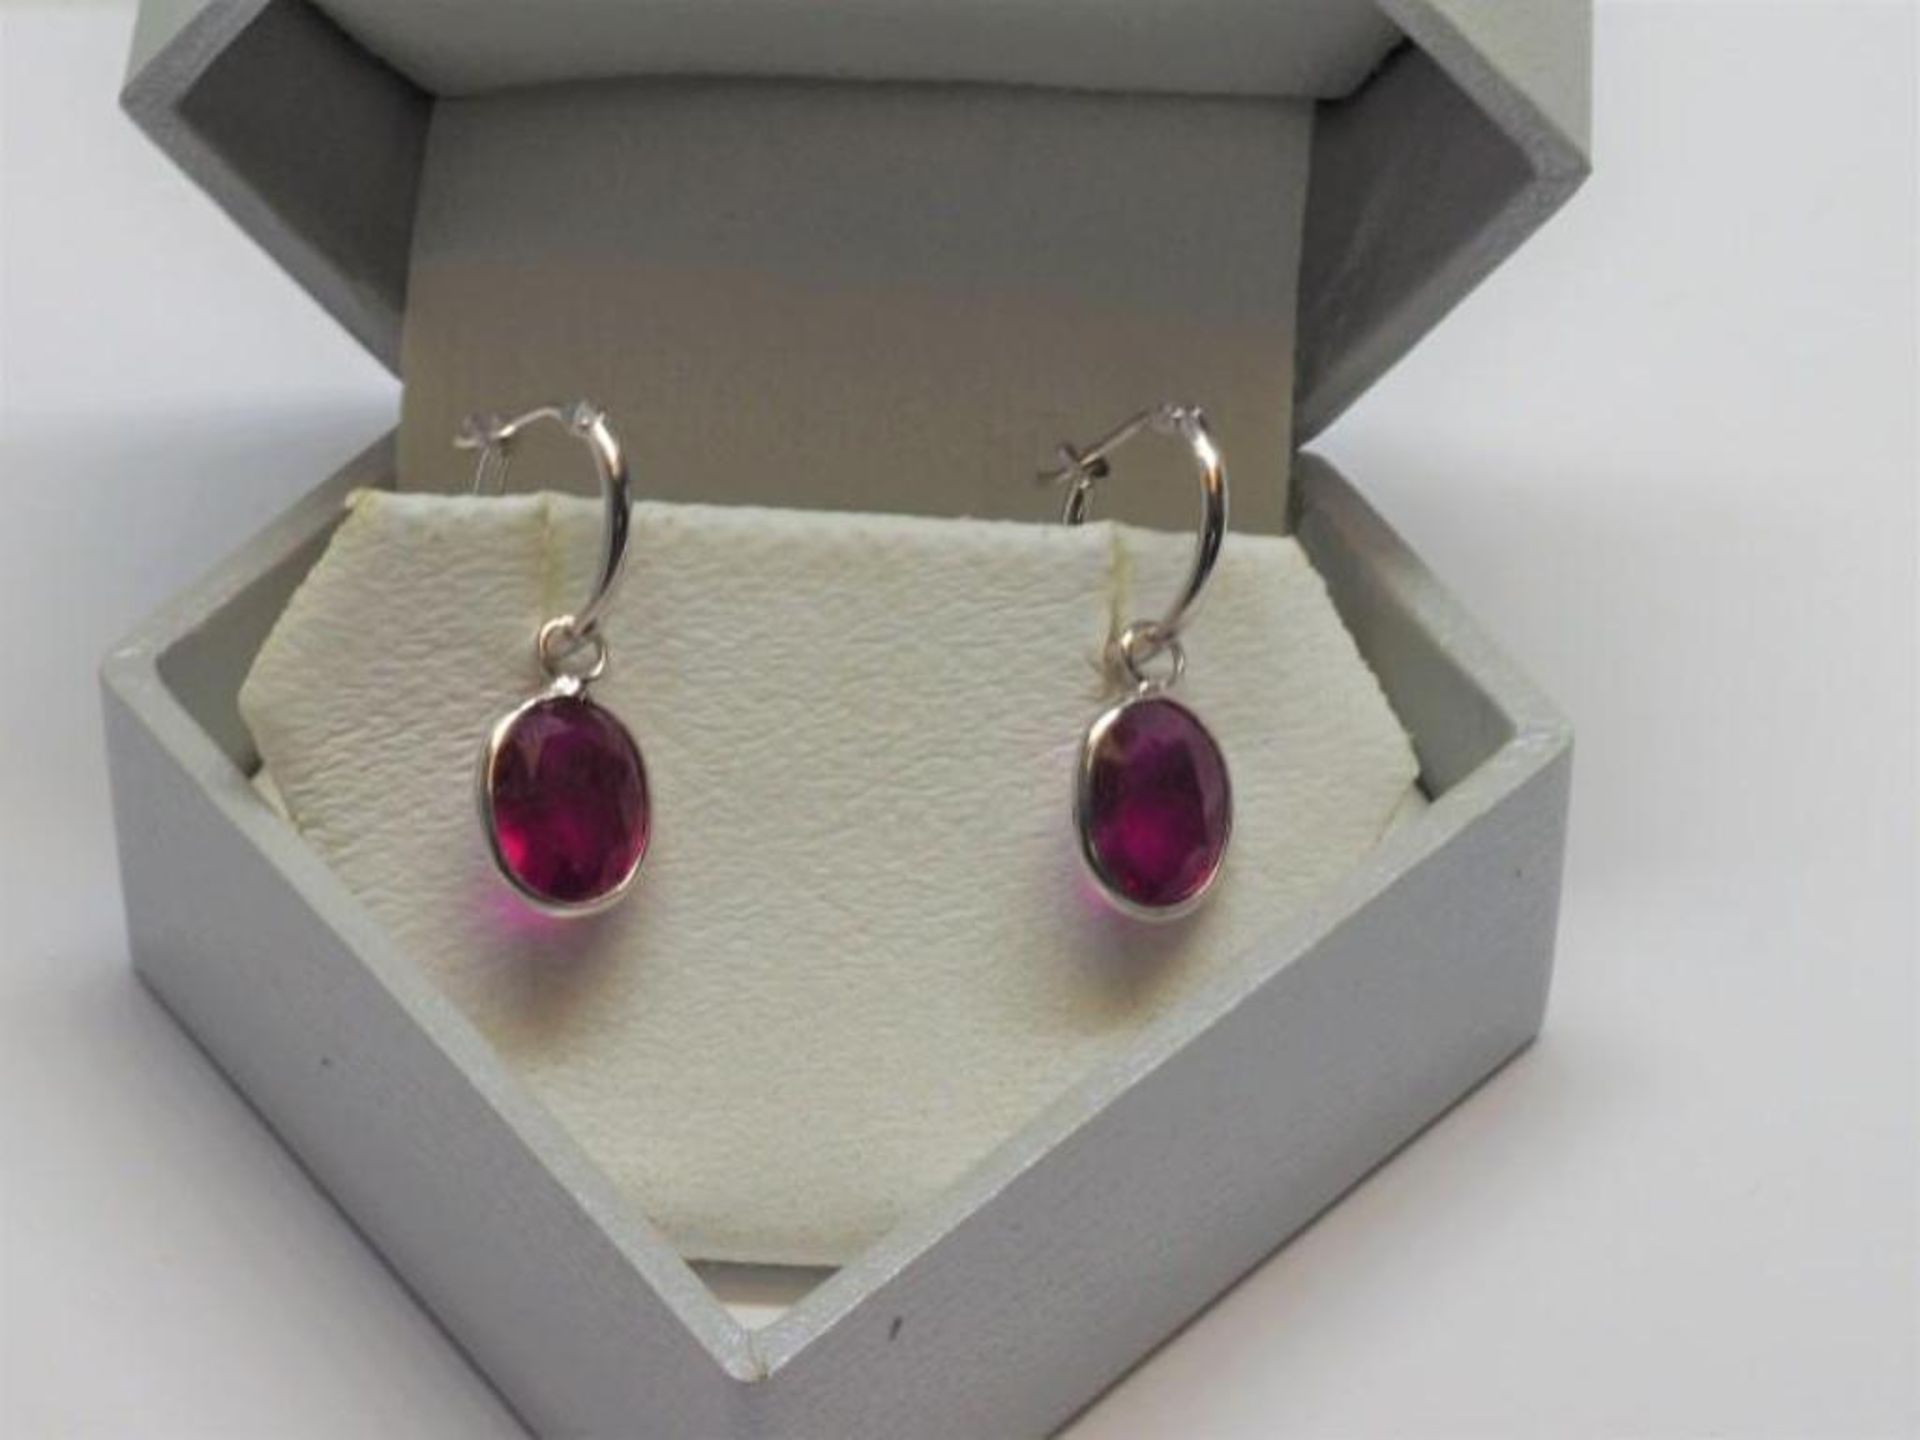 14KT White Gold Enchanced Natural Ruby Pinkysh Read 5.15ct Earrings Insurance Value $999 - Image 2 of 3